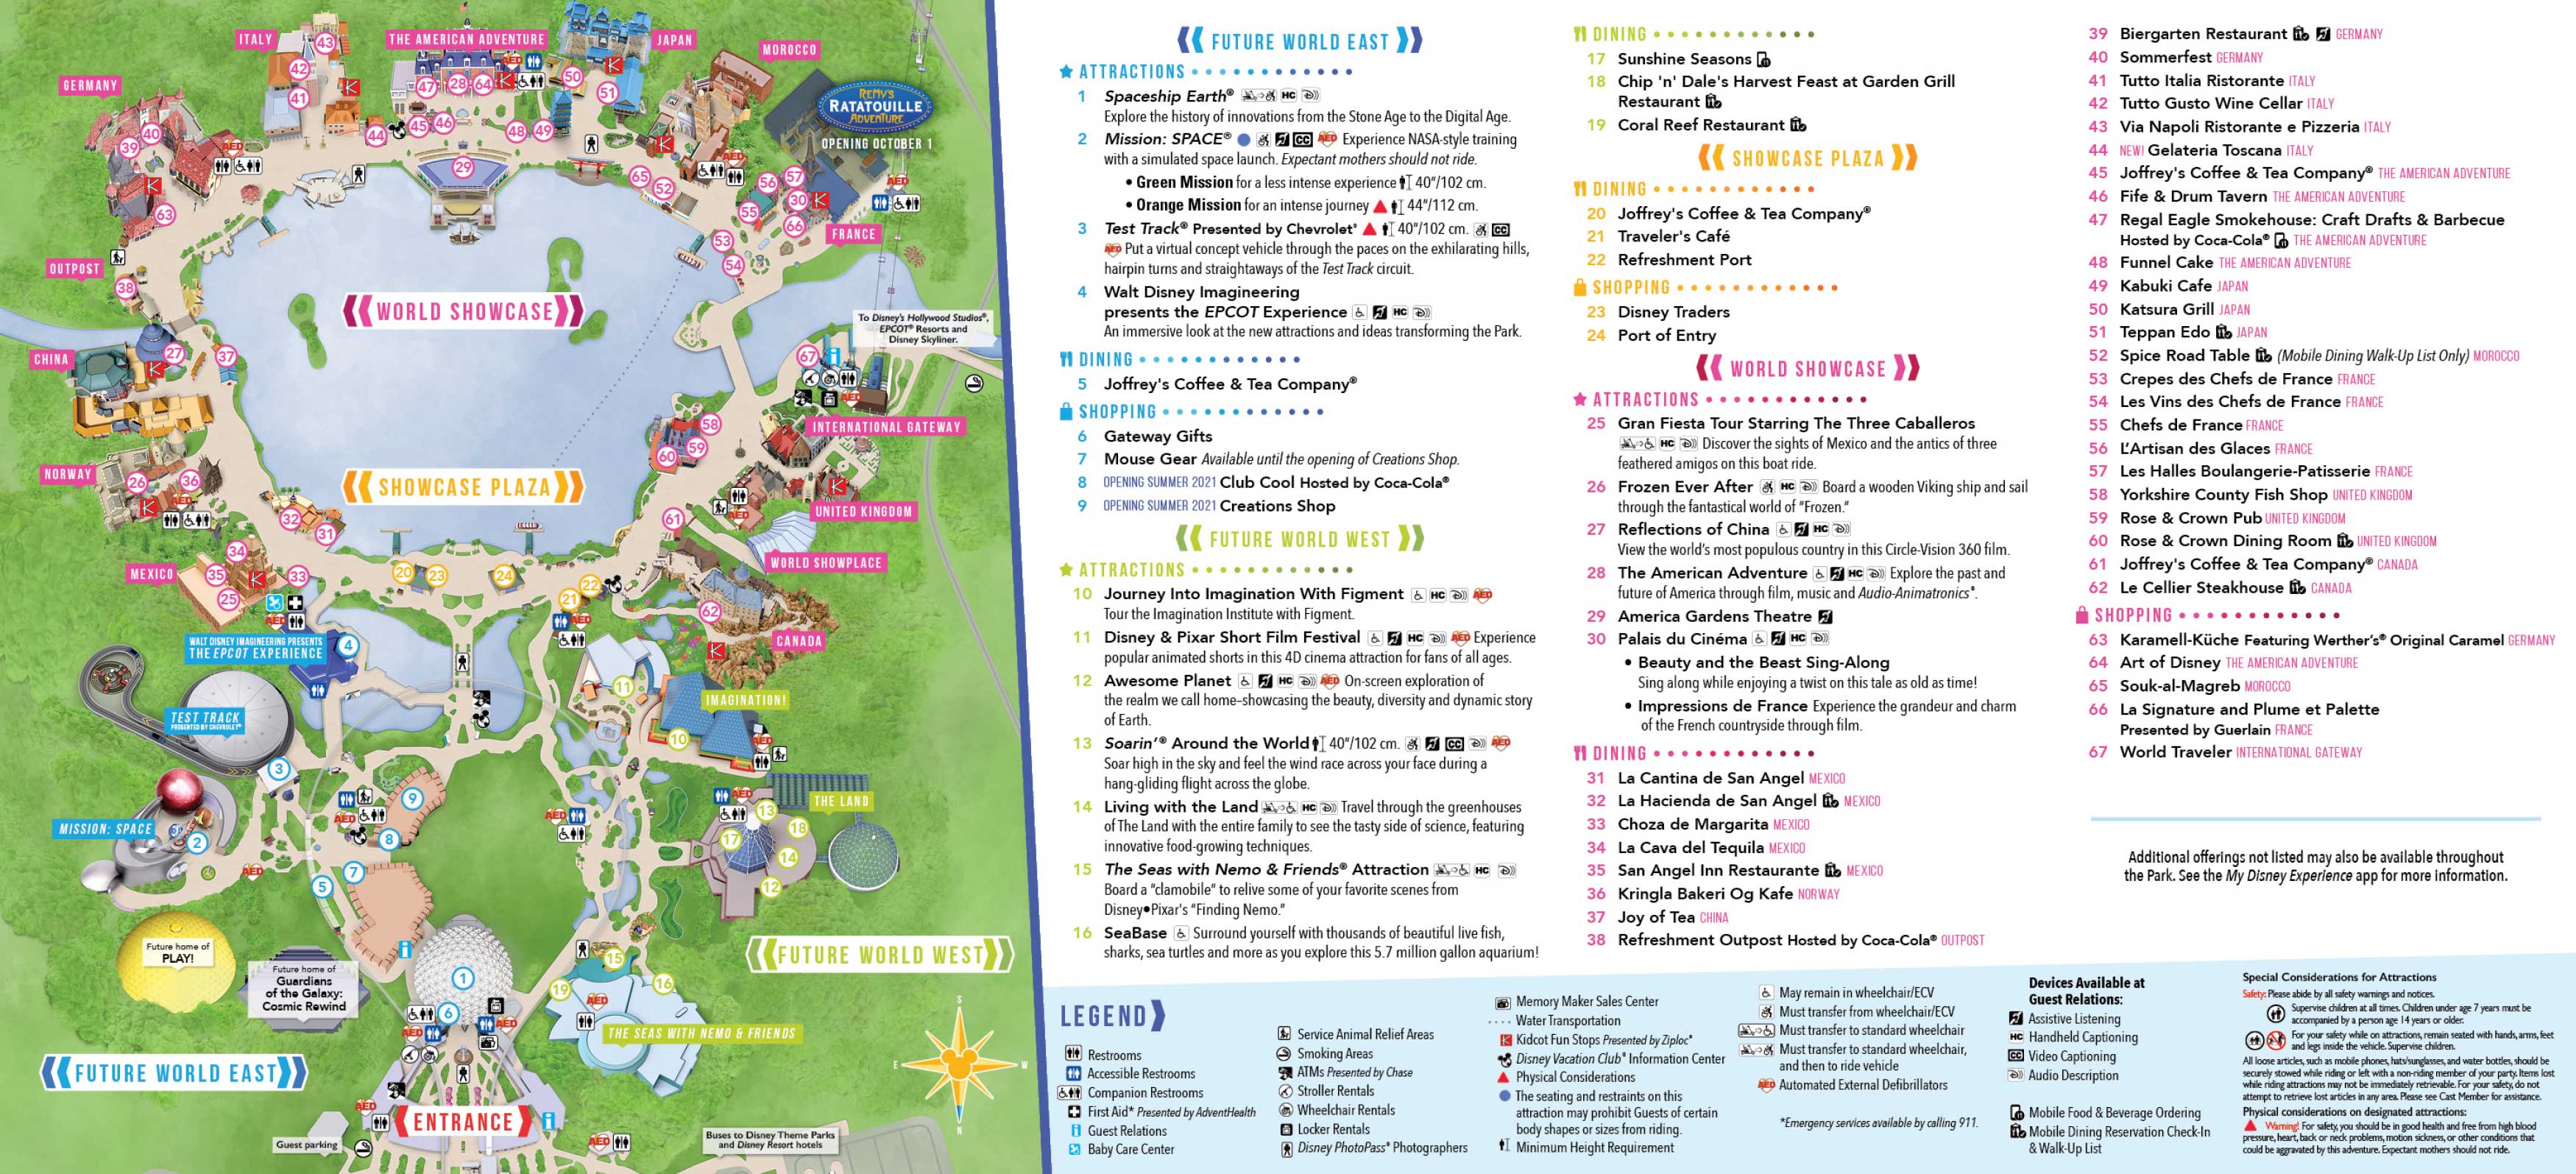 New EPCOT Guide map includes Creations Shop and Club Cool